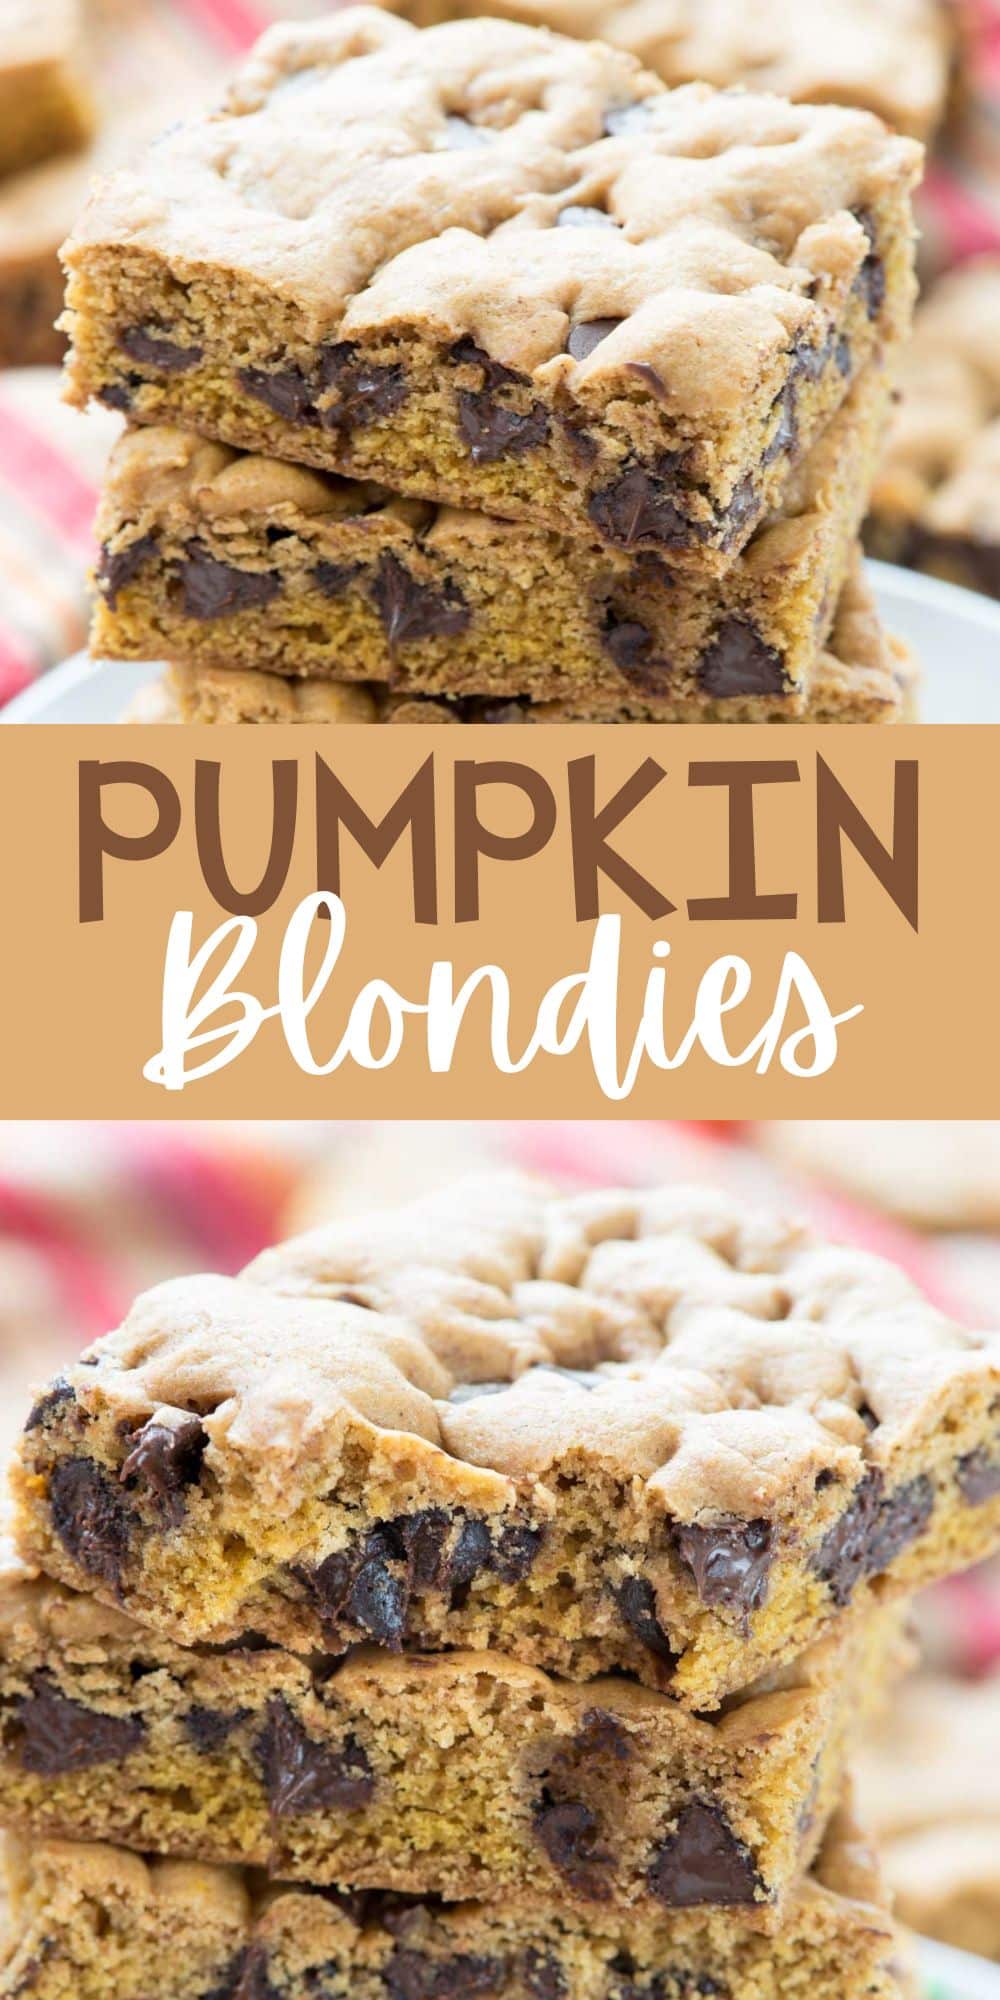 two photos of stacked pumpkin blondies with chocolate chips baked in with words on the image.